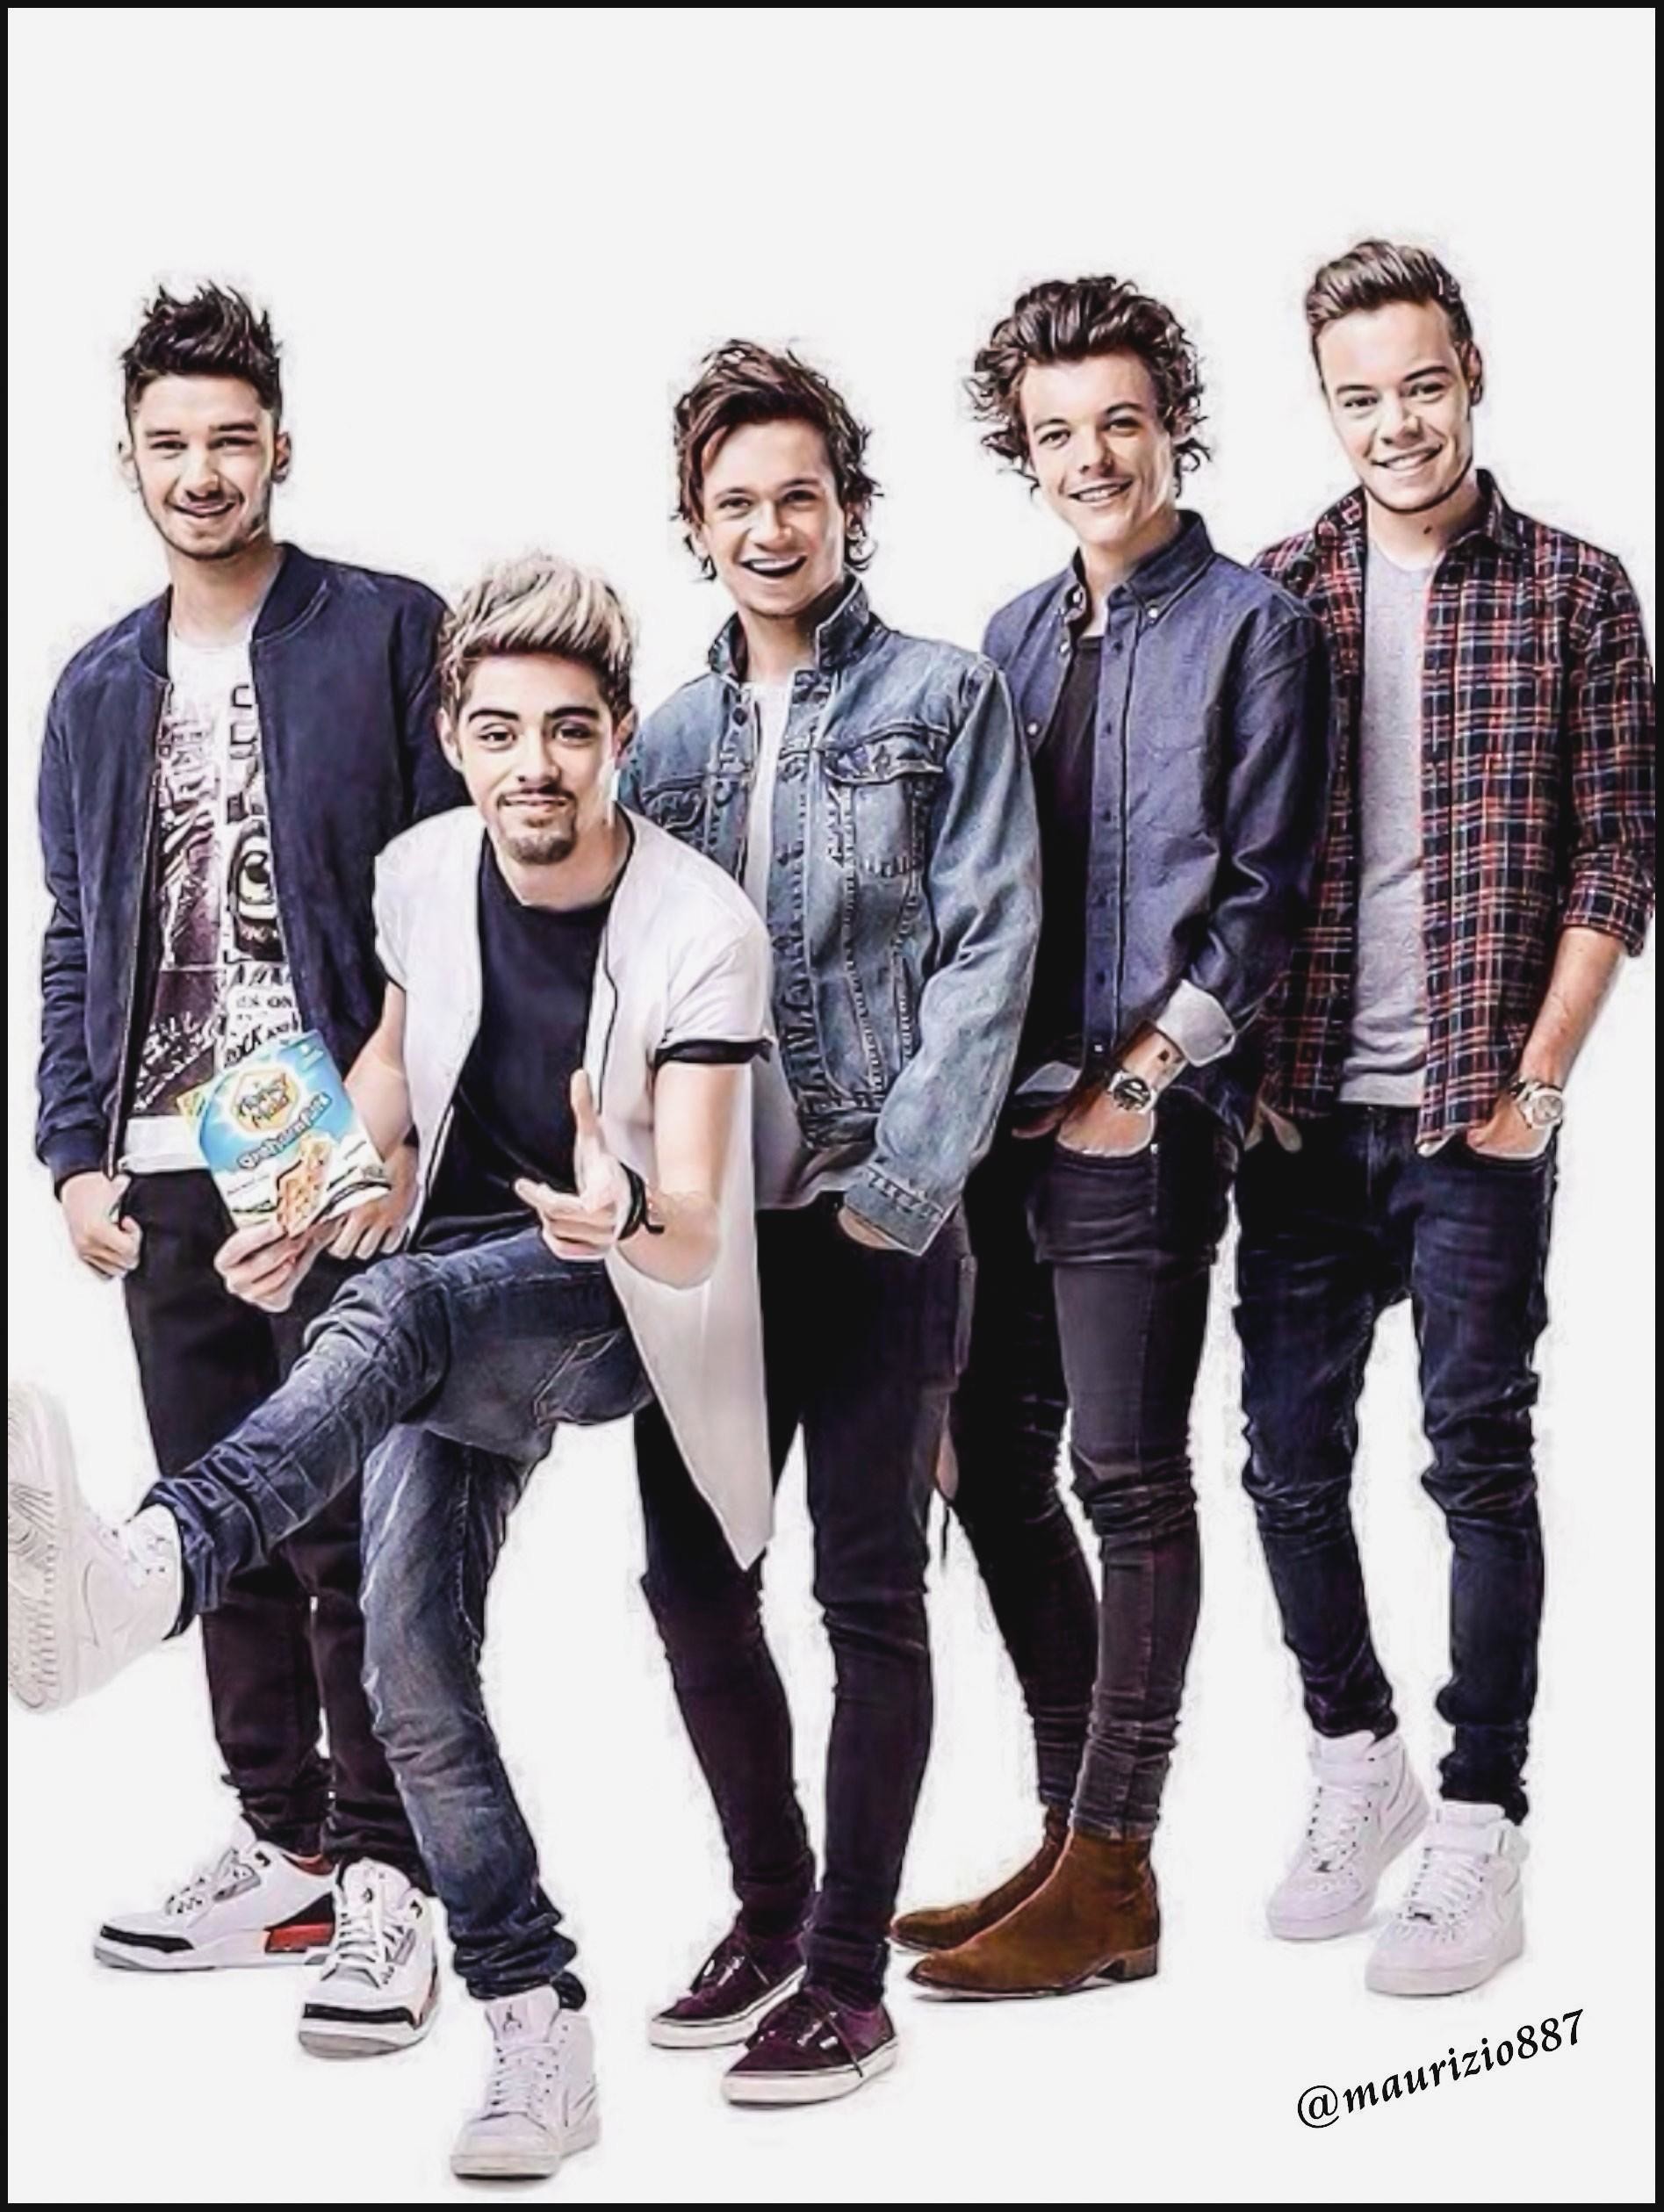 one direction wallpaper,soziale gruppe,cool,jugend,spaß,album cover